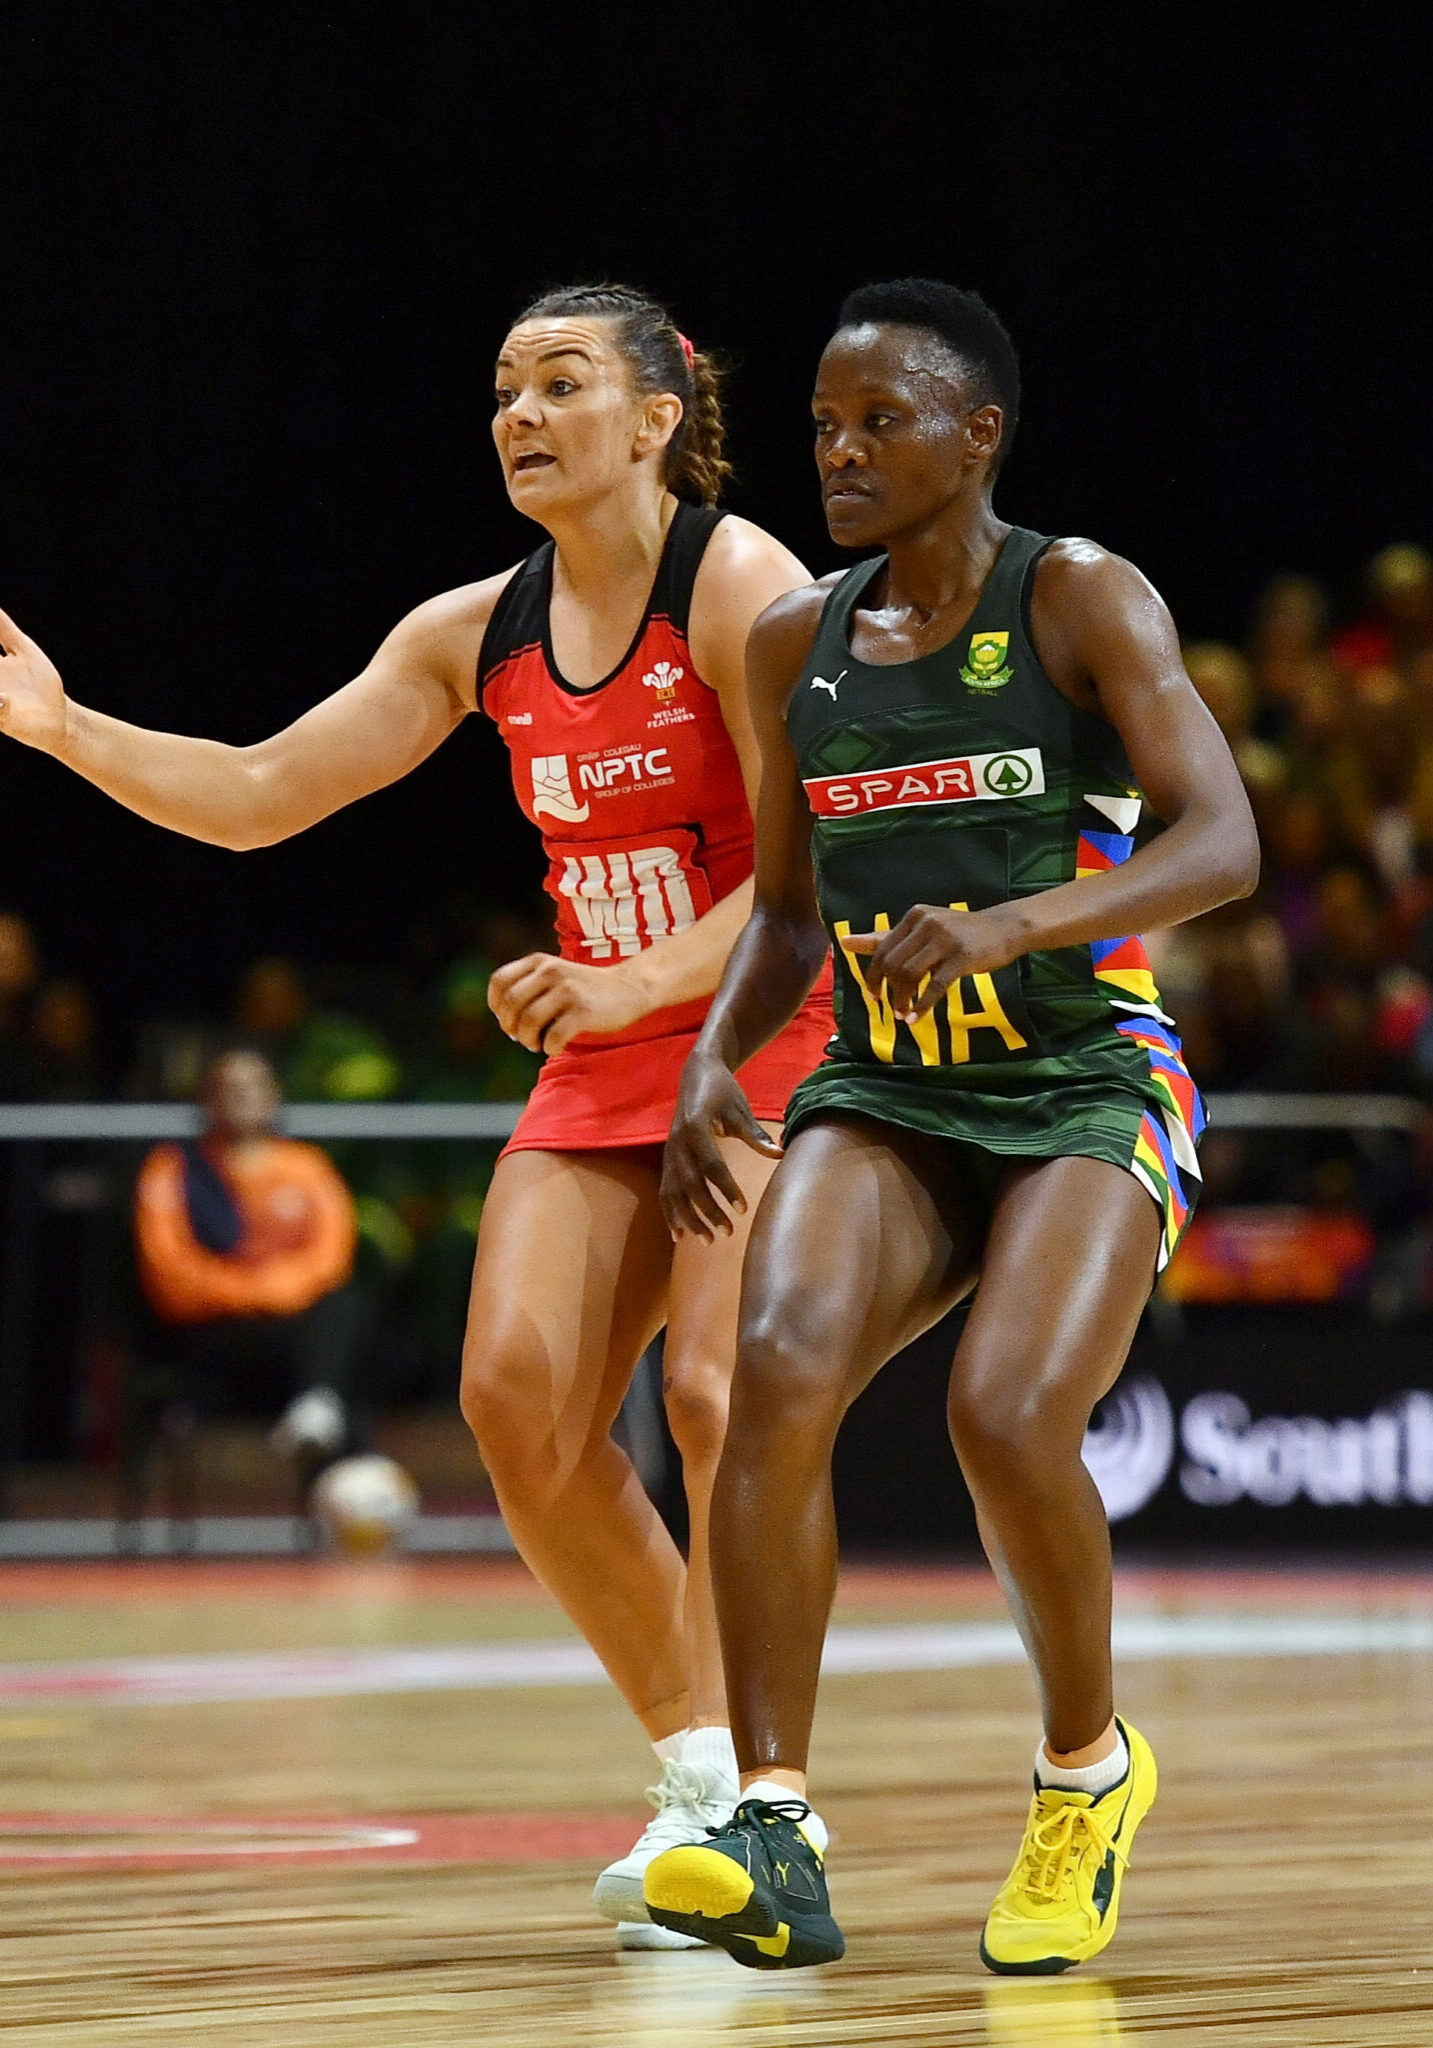 CAPE TOWN, SOUTH AFRICA - JULY 28: Nia Jones (Captain) of Wales and Bongiwe Msomi (Captain) of South Africa during the Netball World Cup 2023, Pool C match between South Africa and Wales at Cape Town International Convention Centre Court 1 on July 28, 2023 in Cape Town, South Africa. (Photo by Ashley Vlotman/Gallo Images/Netball World Cup 2023)